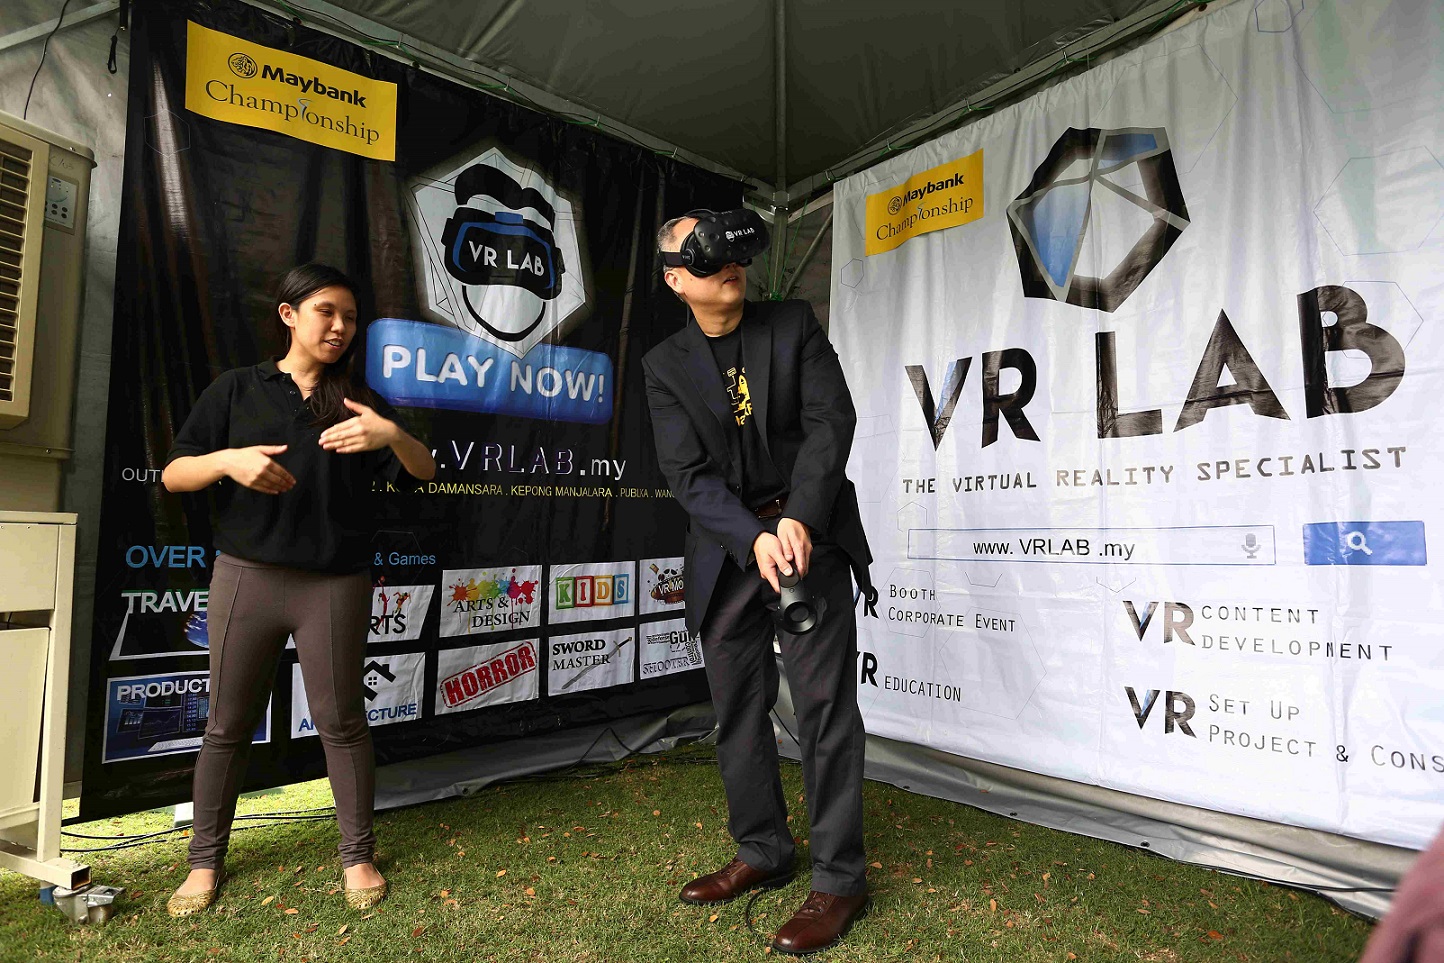 Golf and tech the perfect partners in the Maybank Championship